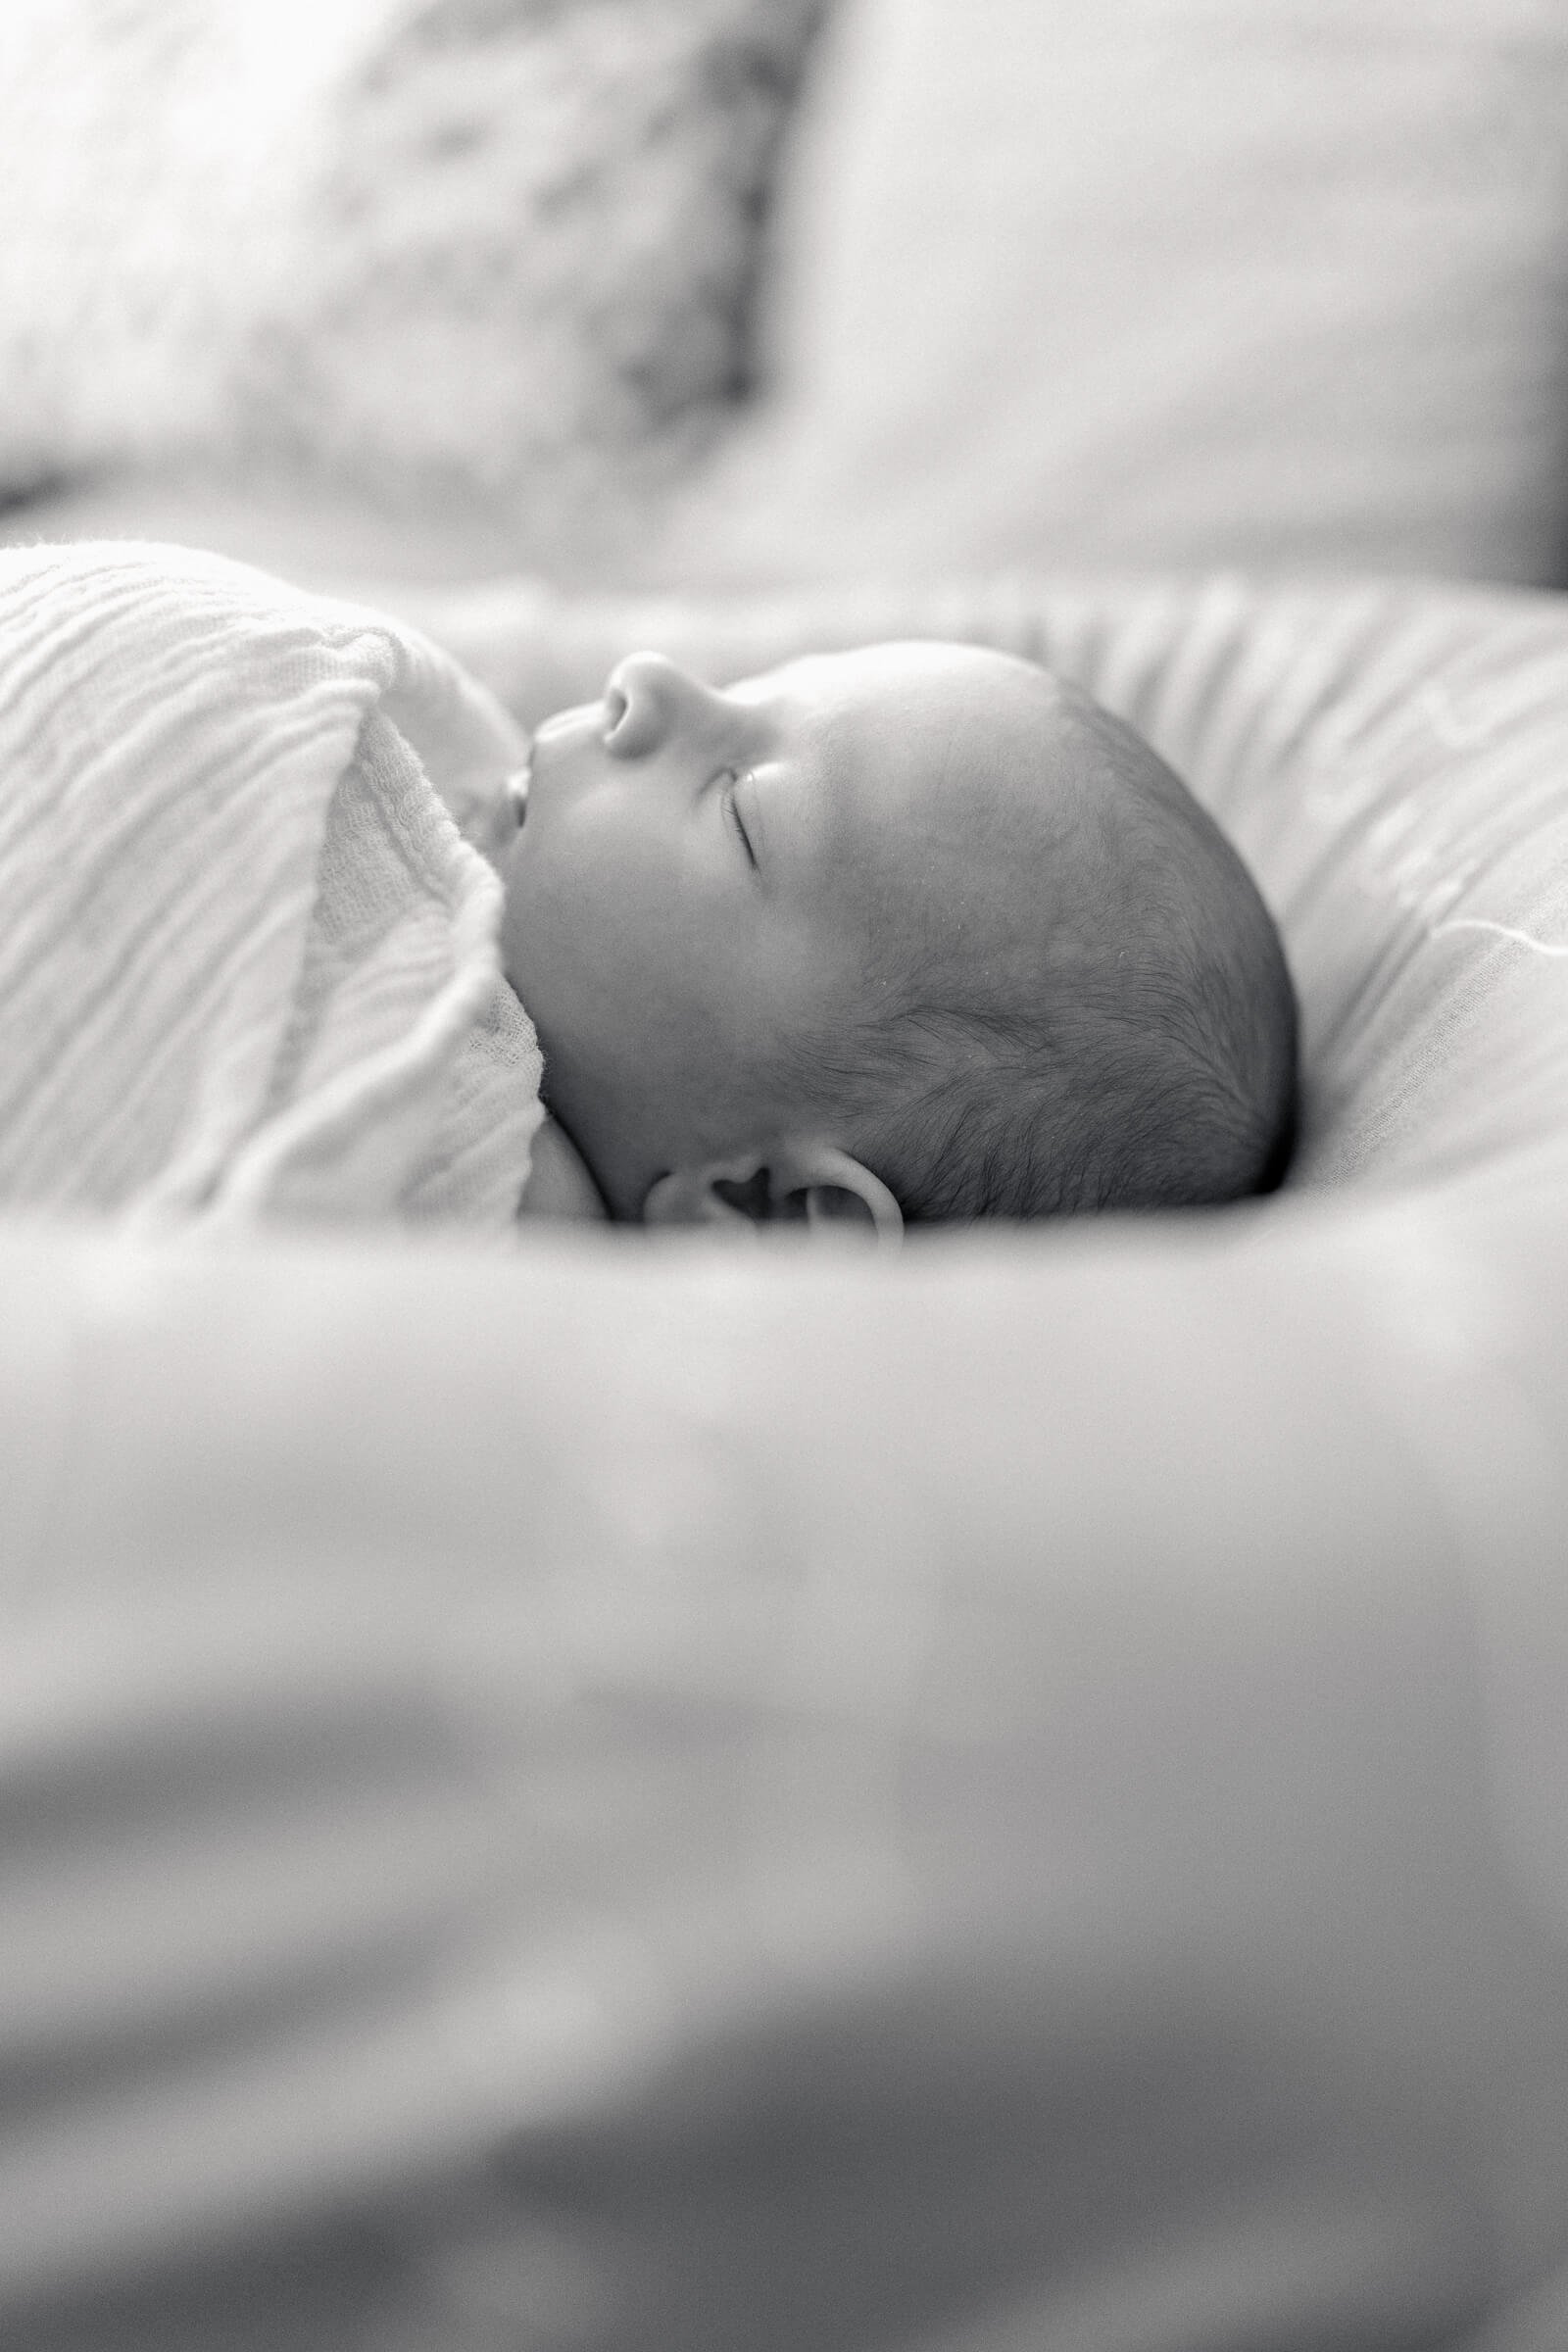 Black and white portrait of sleeping baby on couch